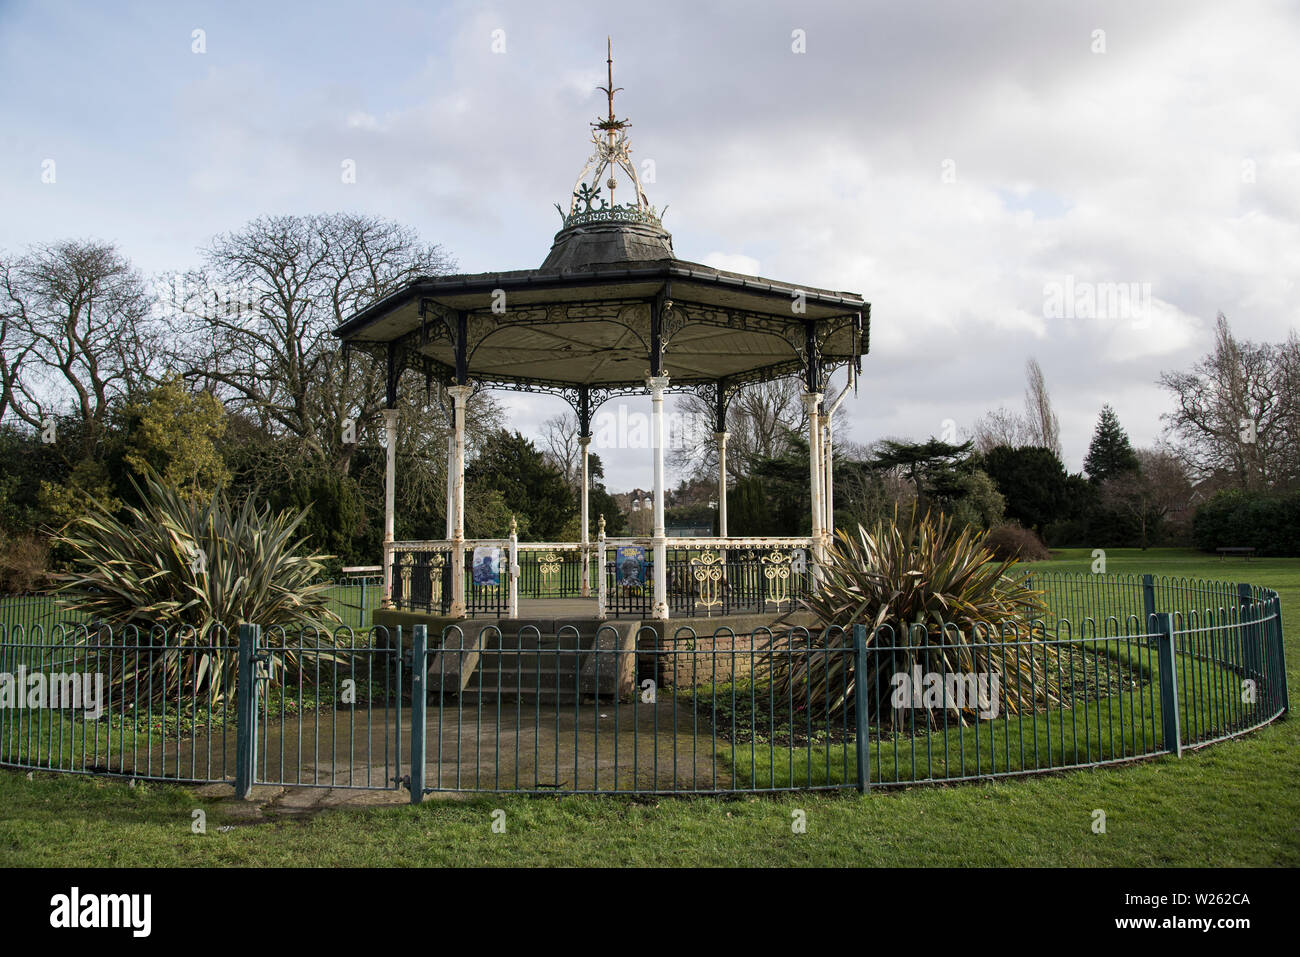 The iconic bandstand where David Bowie and friends from the Beckenham Arts Lab performed  at the Summer Festival in 1969. The bandstand is in the Croydon Road Recreation Ground in Beckenham in south London Stock Photo